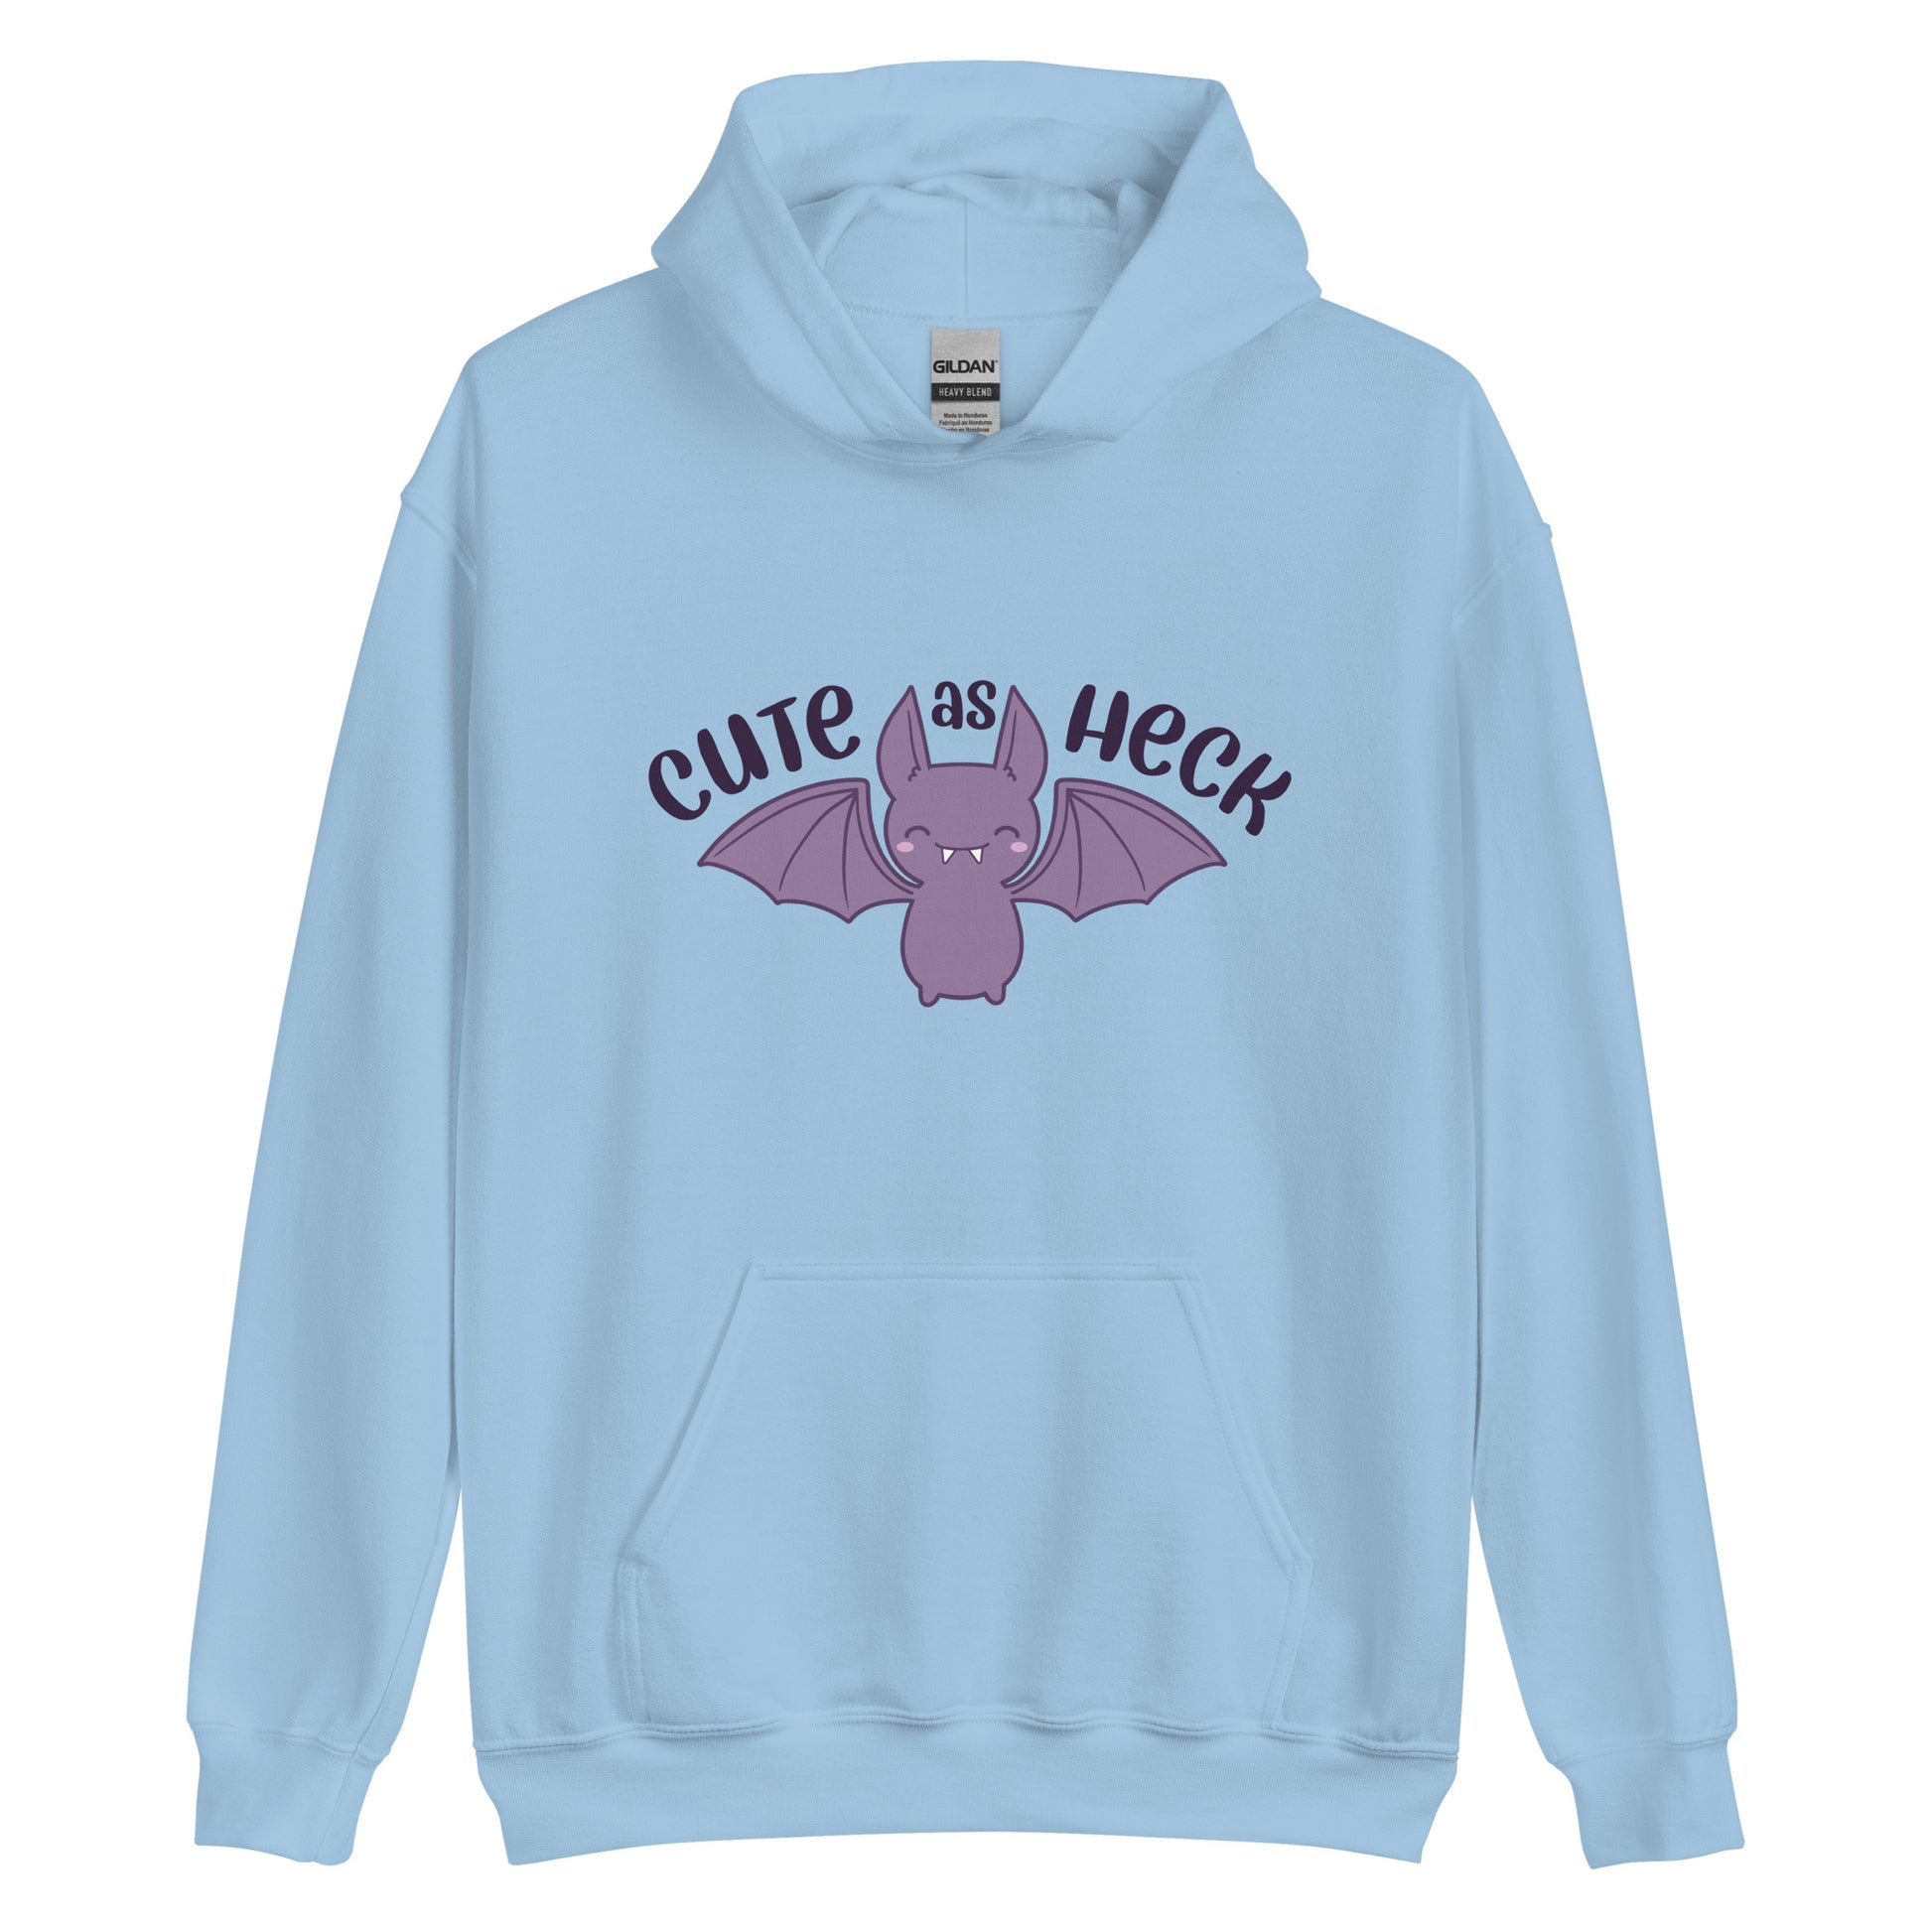 A light blue hooded sweatshirt featuring an illustration of a cute, smiling purple bat. Text above the bat reads "Cute As Heck"